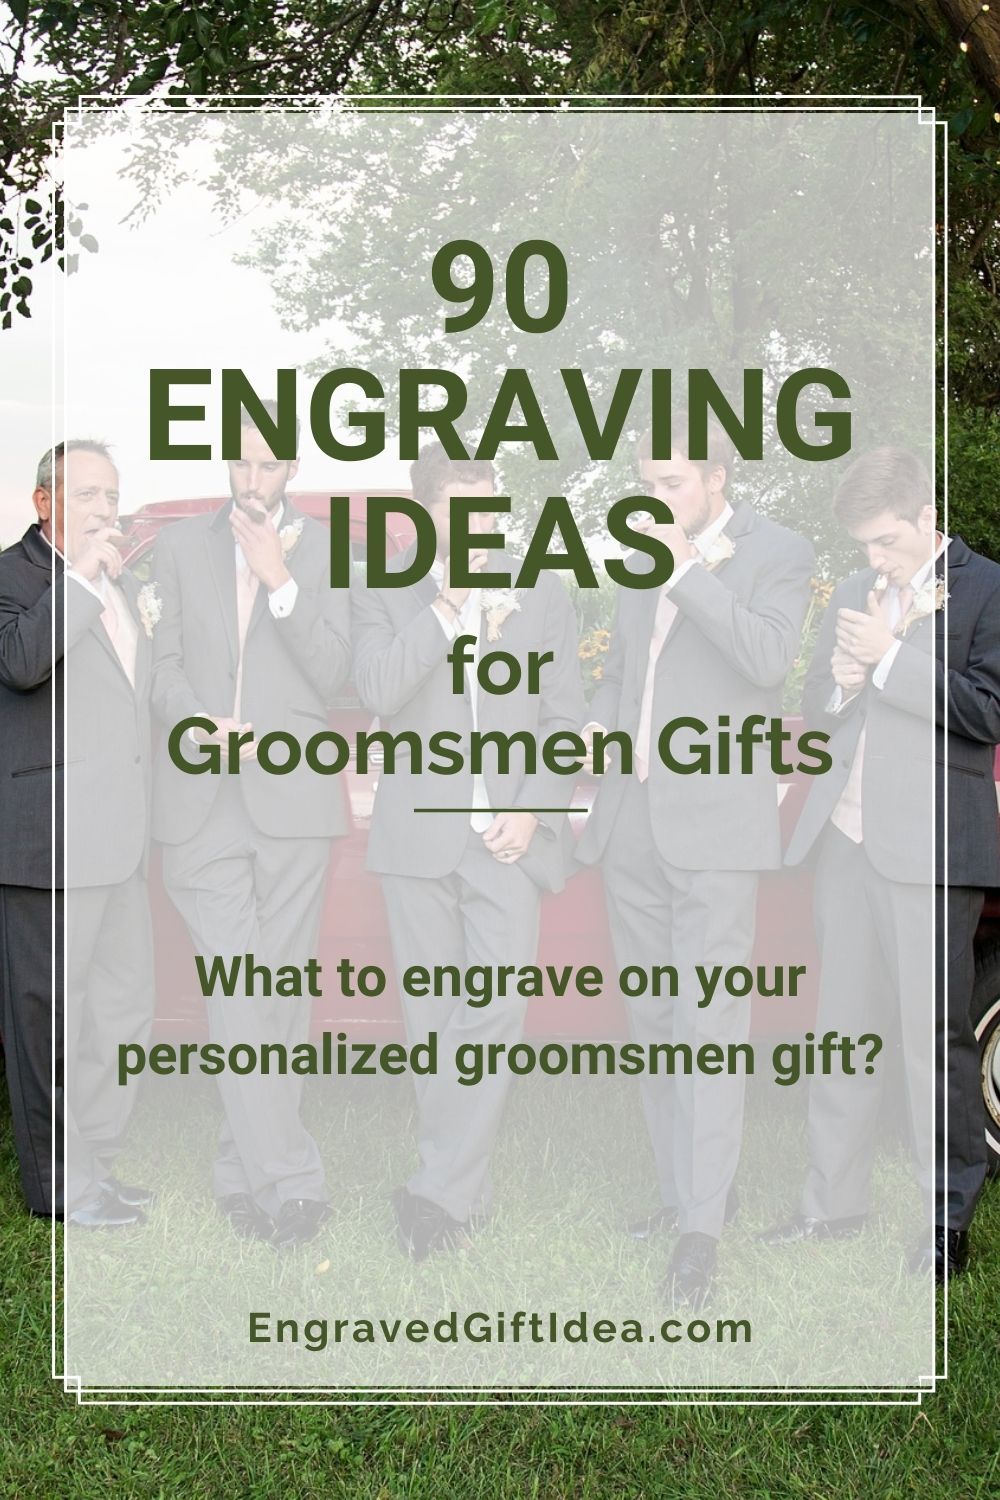 90 Engraving Ideas for Groomsmen Gifts